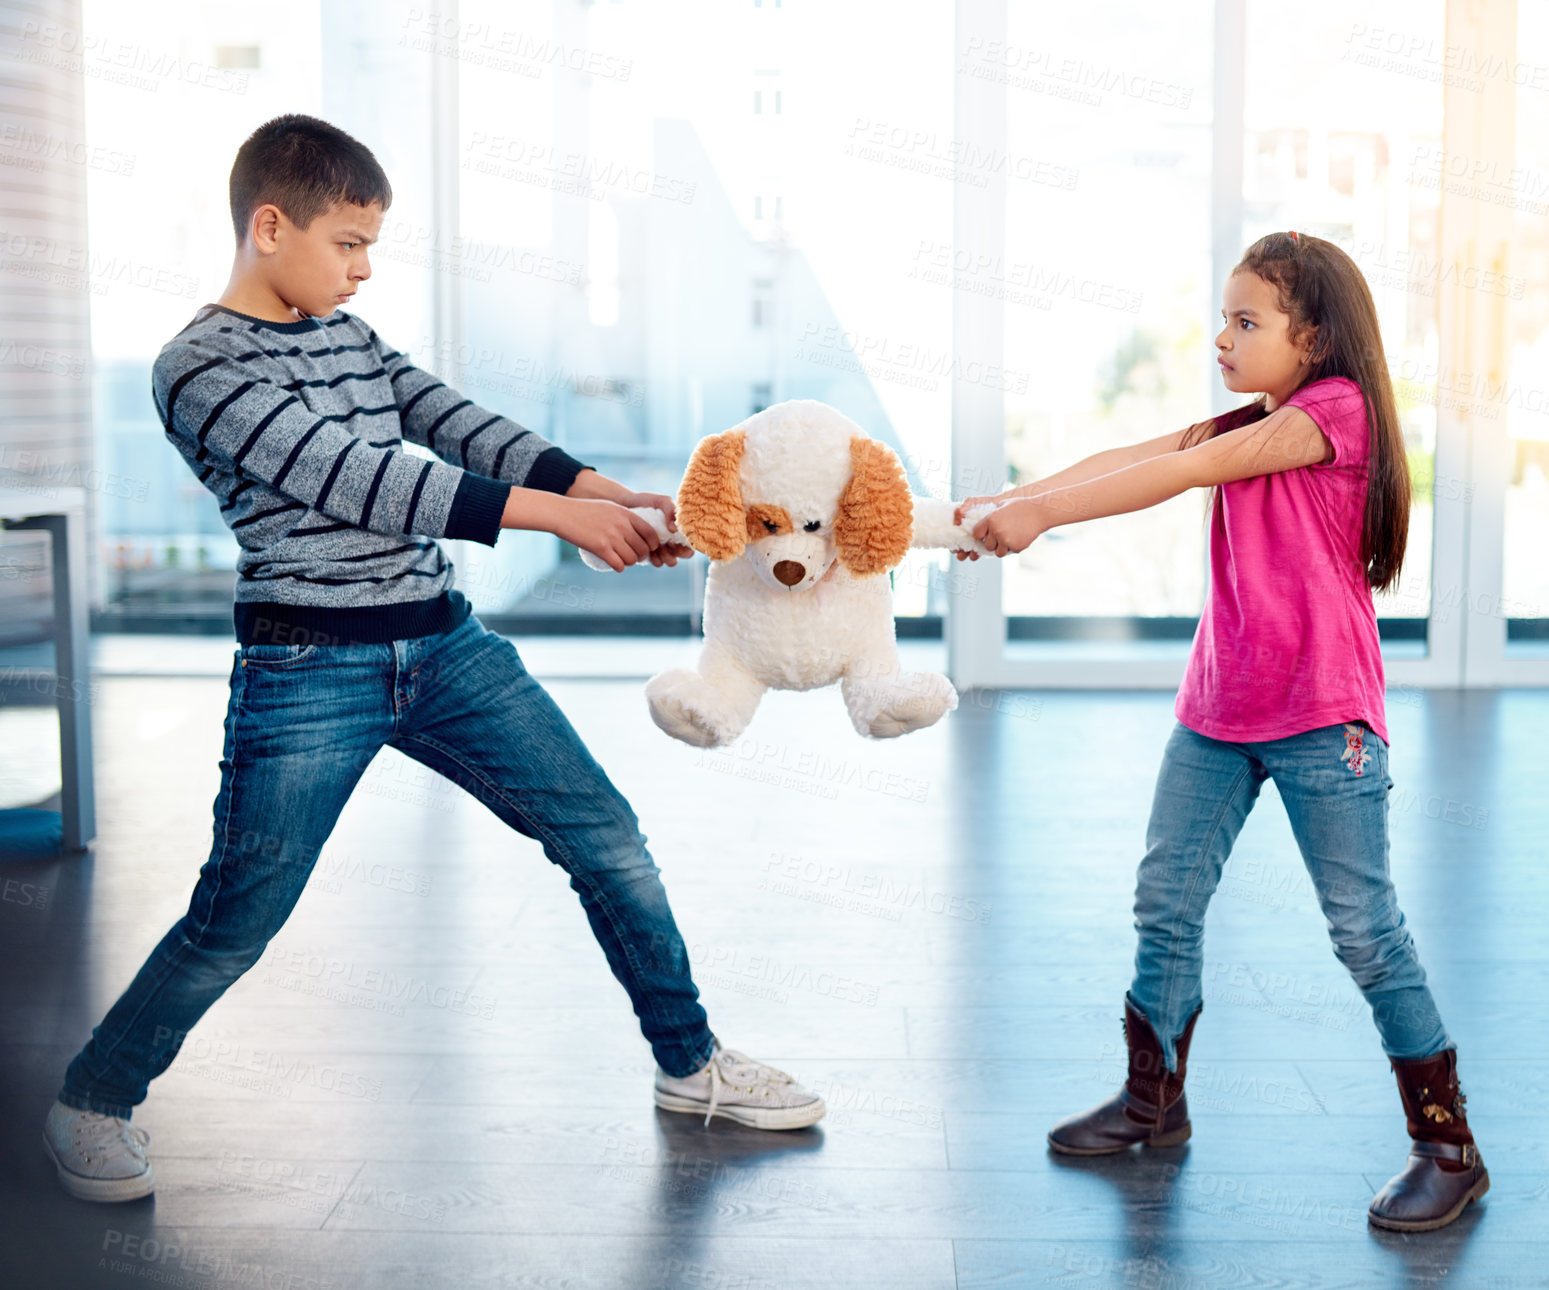 Buy stock photo Children, fight or pulling toy in anger, problem or frustrated with youth at home in living room. Young, argument or conflict in house, apartment or bedroom with kids for child development or growth